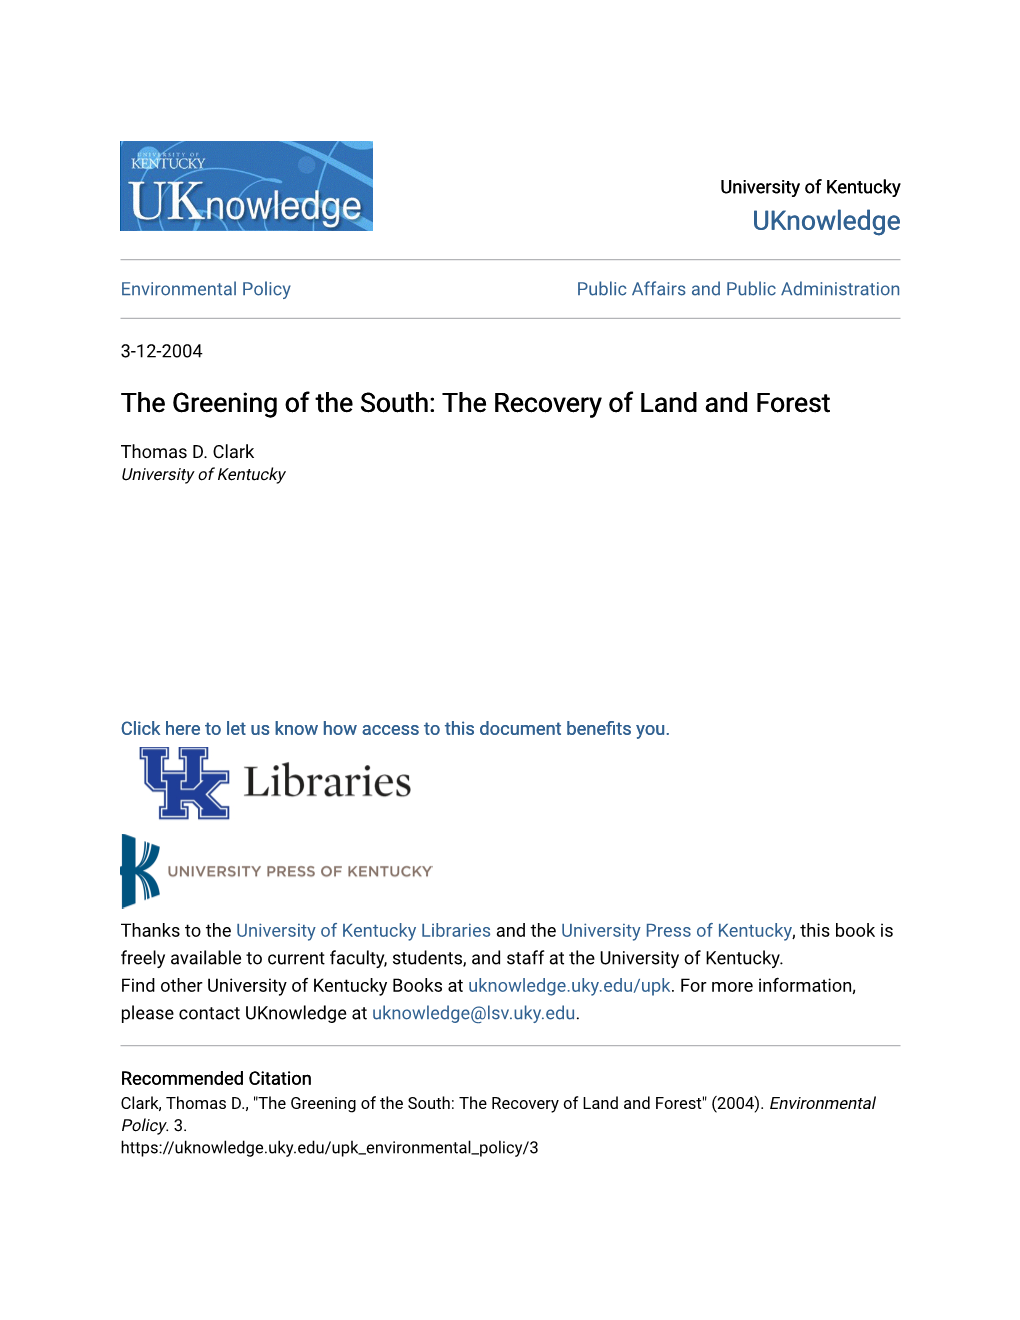 The Greening of the South: the Recovery of Land and Forest